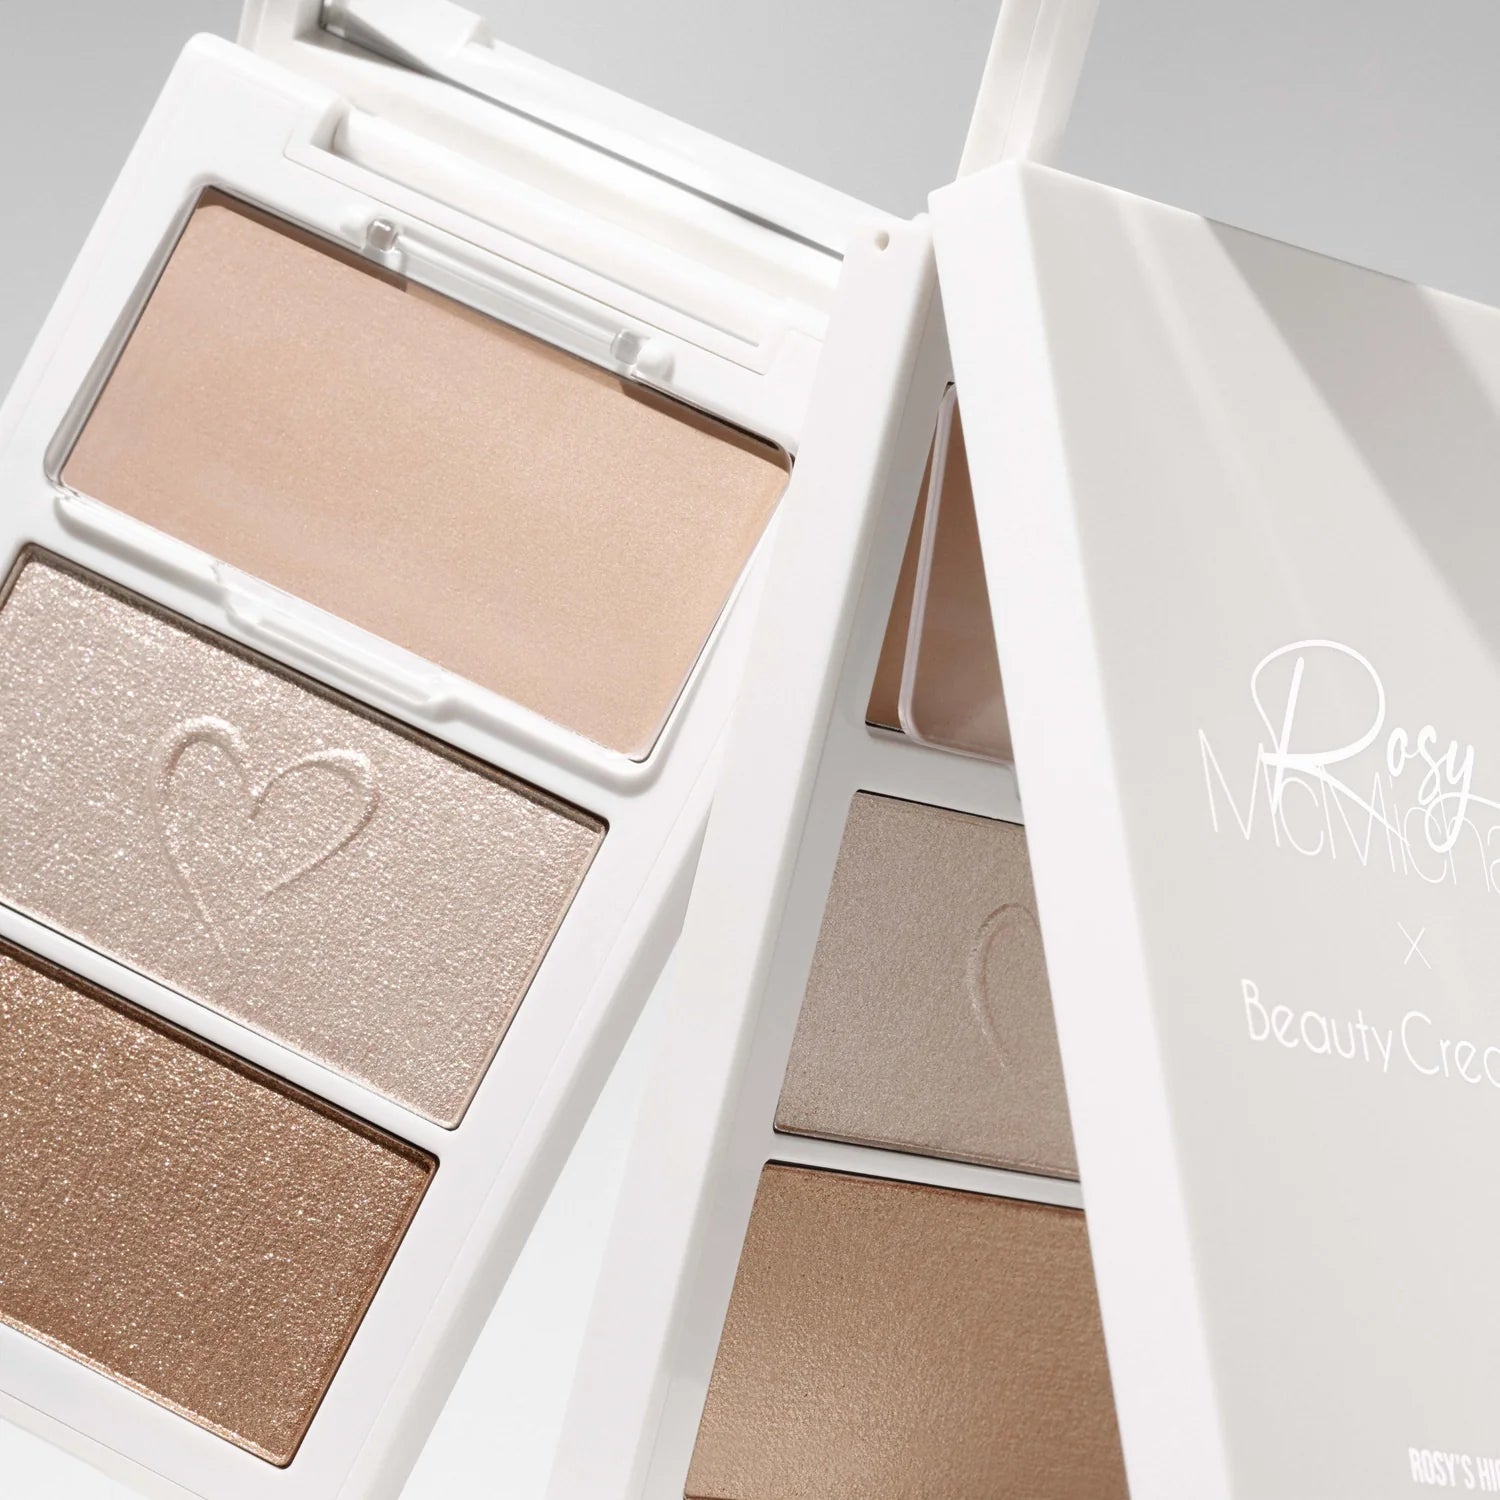 Beauty Creations x Rosy McMichael Vol 2 Rosy's Highlighters